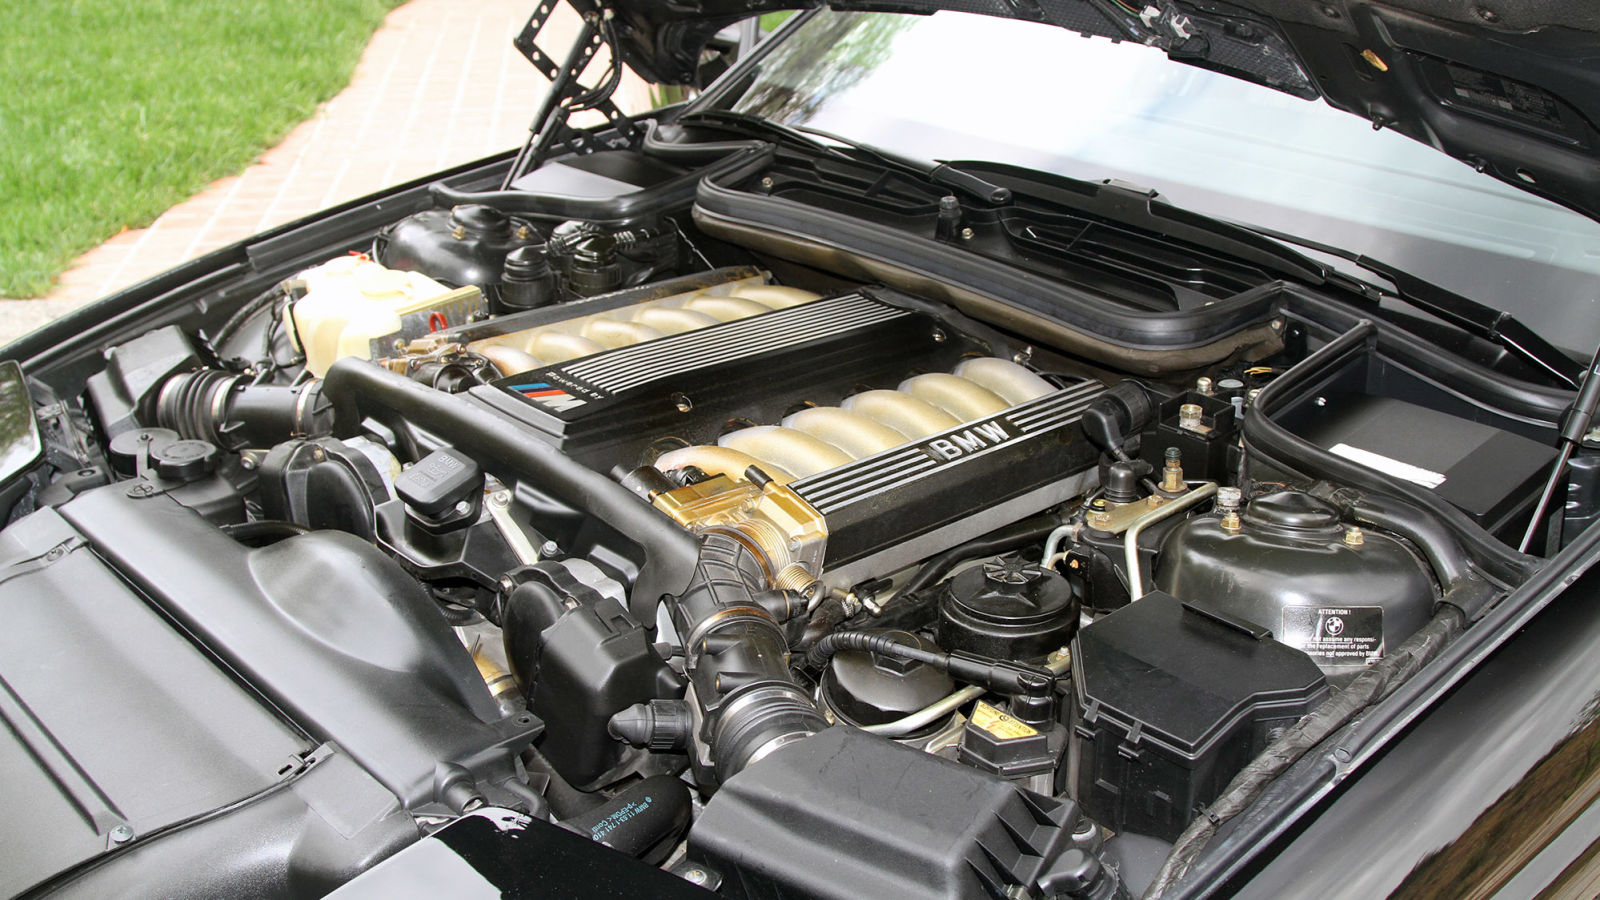 The color of the intake manifold is called ‘spilled all over used oil baked on gold’